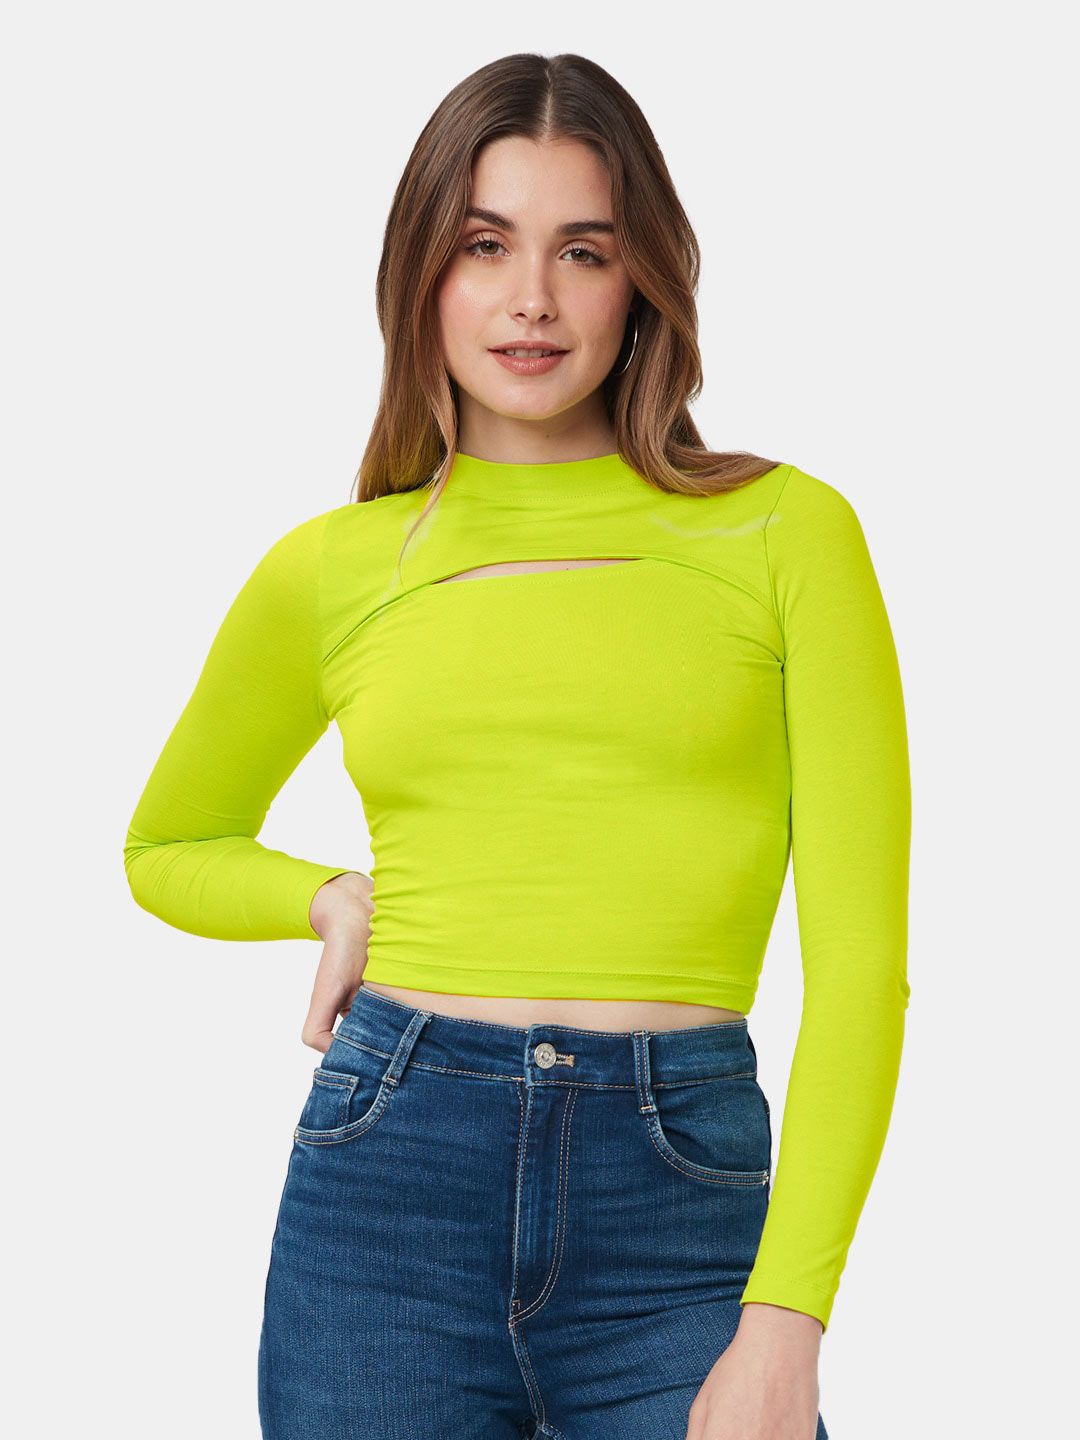 The Souled Store Crop Top Price in India